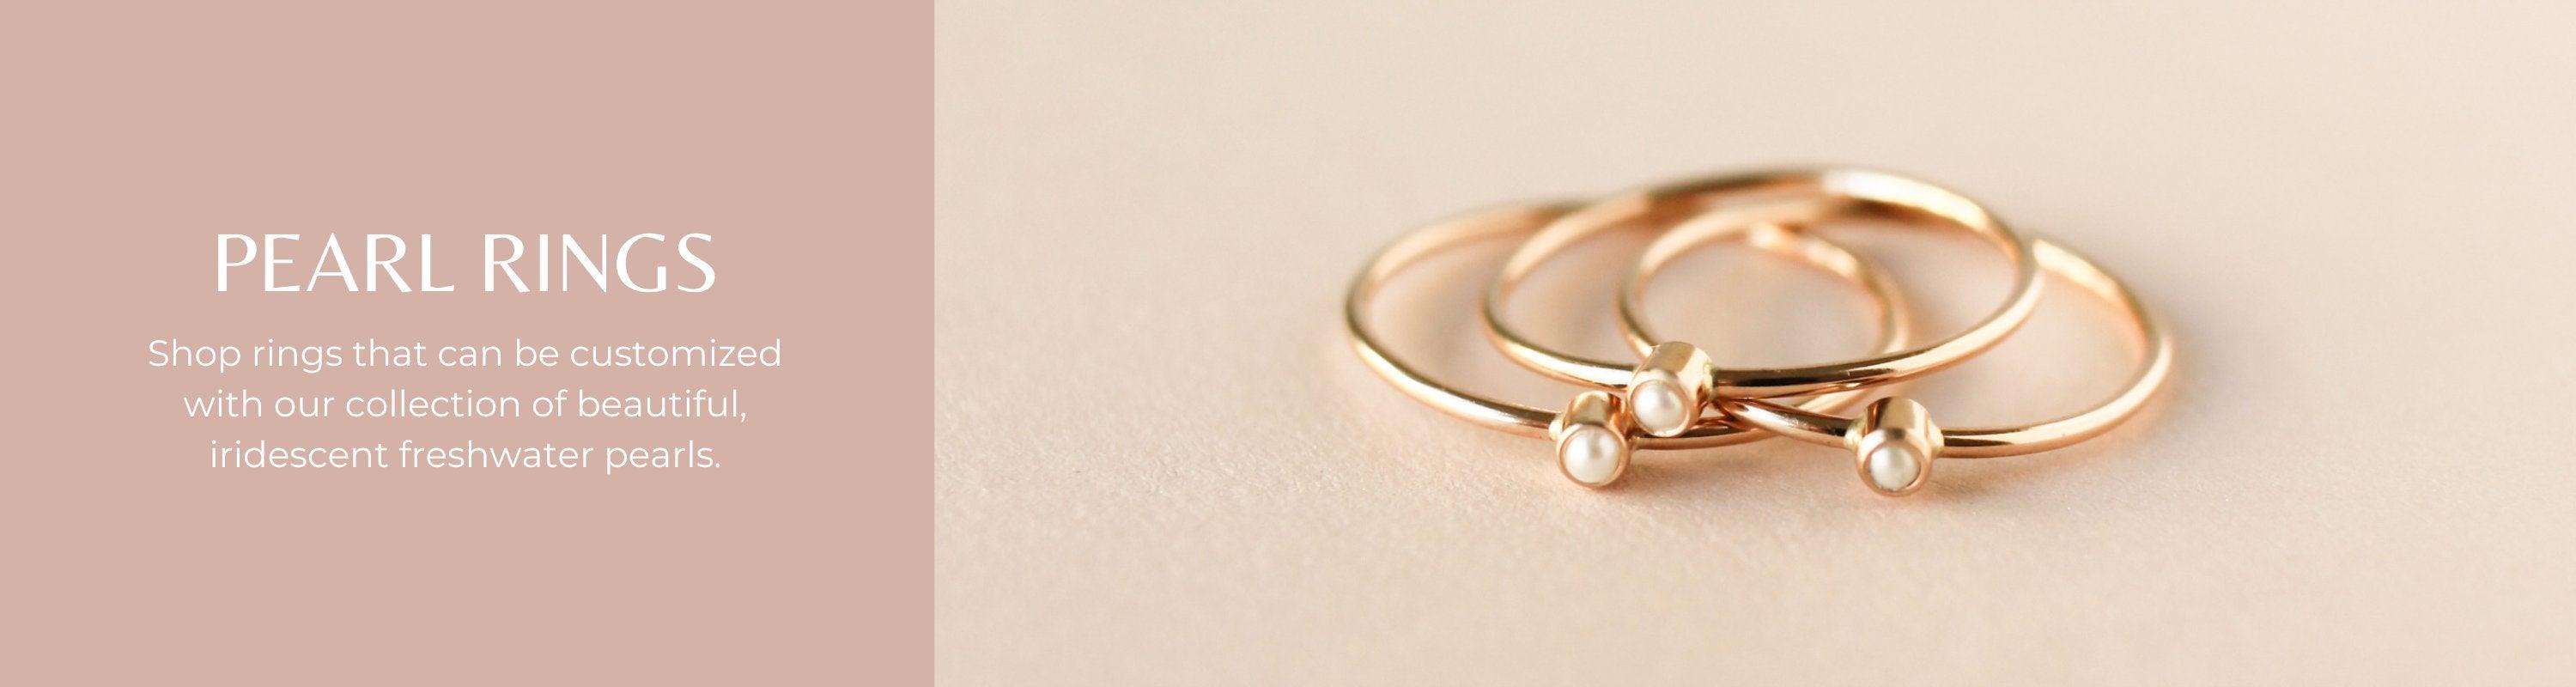 Pearl Rings - Nolia Jewelry - Meaningful + Sustainably Handcrafted Jewelry